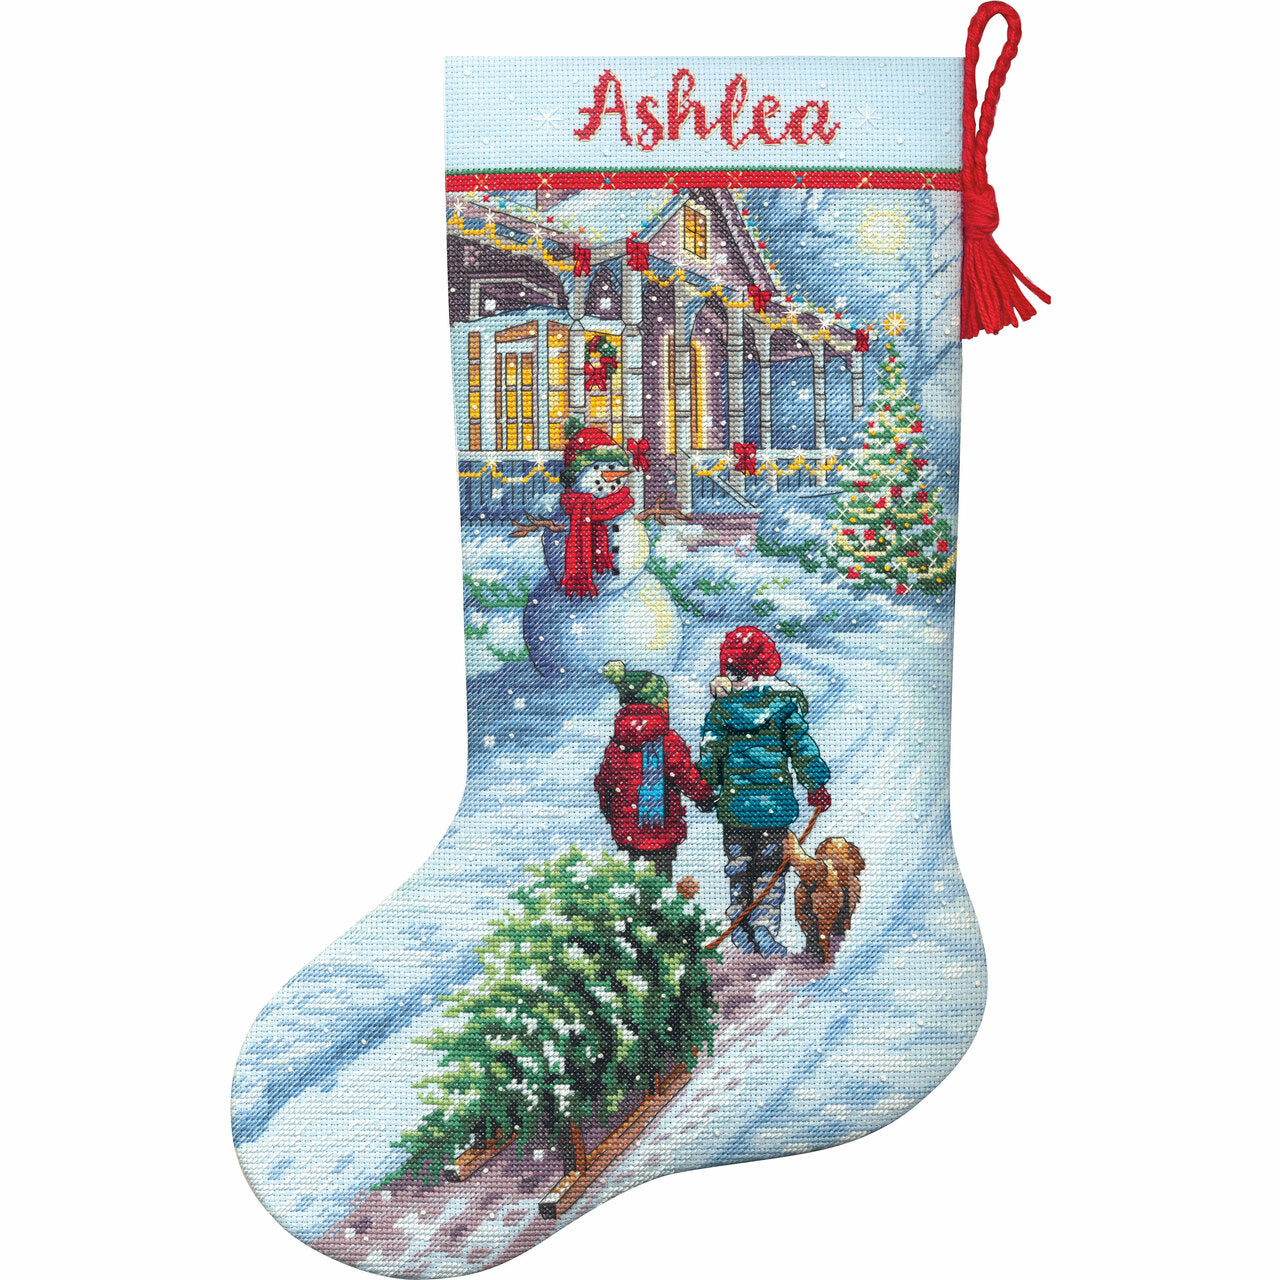 Christmas Tradition counted cross stitch stocking kit